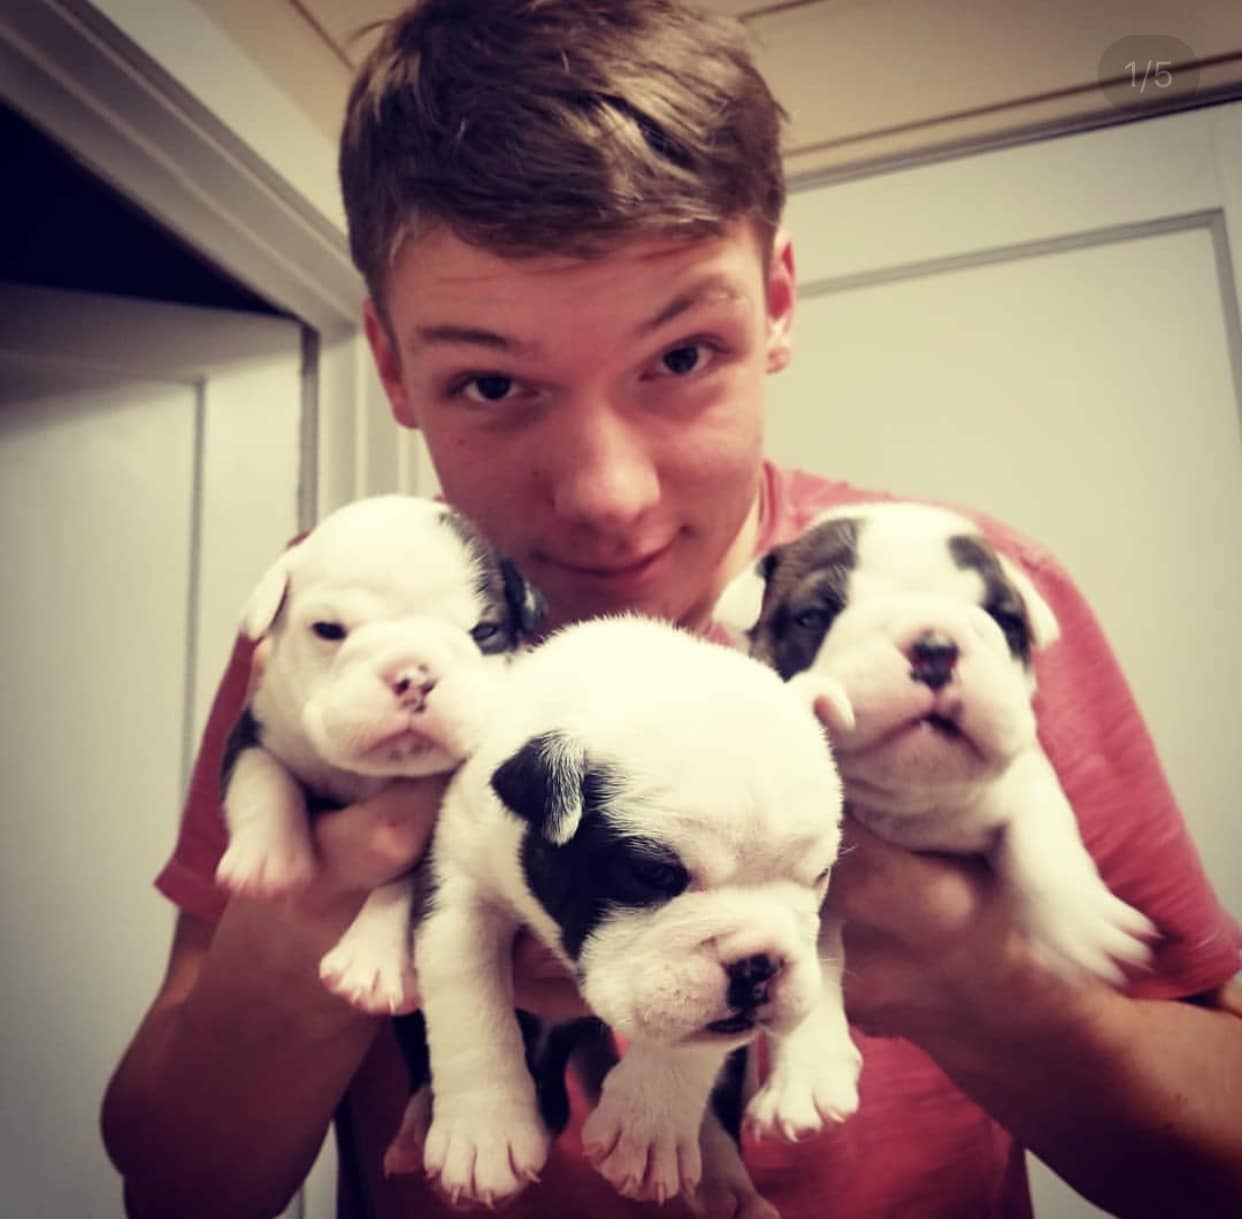 Caleb Allen, high school junior, with three of his brand-new French Bulldog puppies. His dog Angel had puppies less than a month ago, so his hands are full - no pun intended.